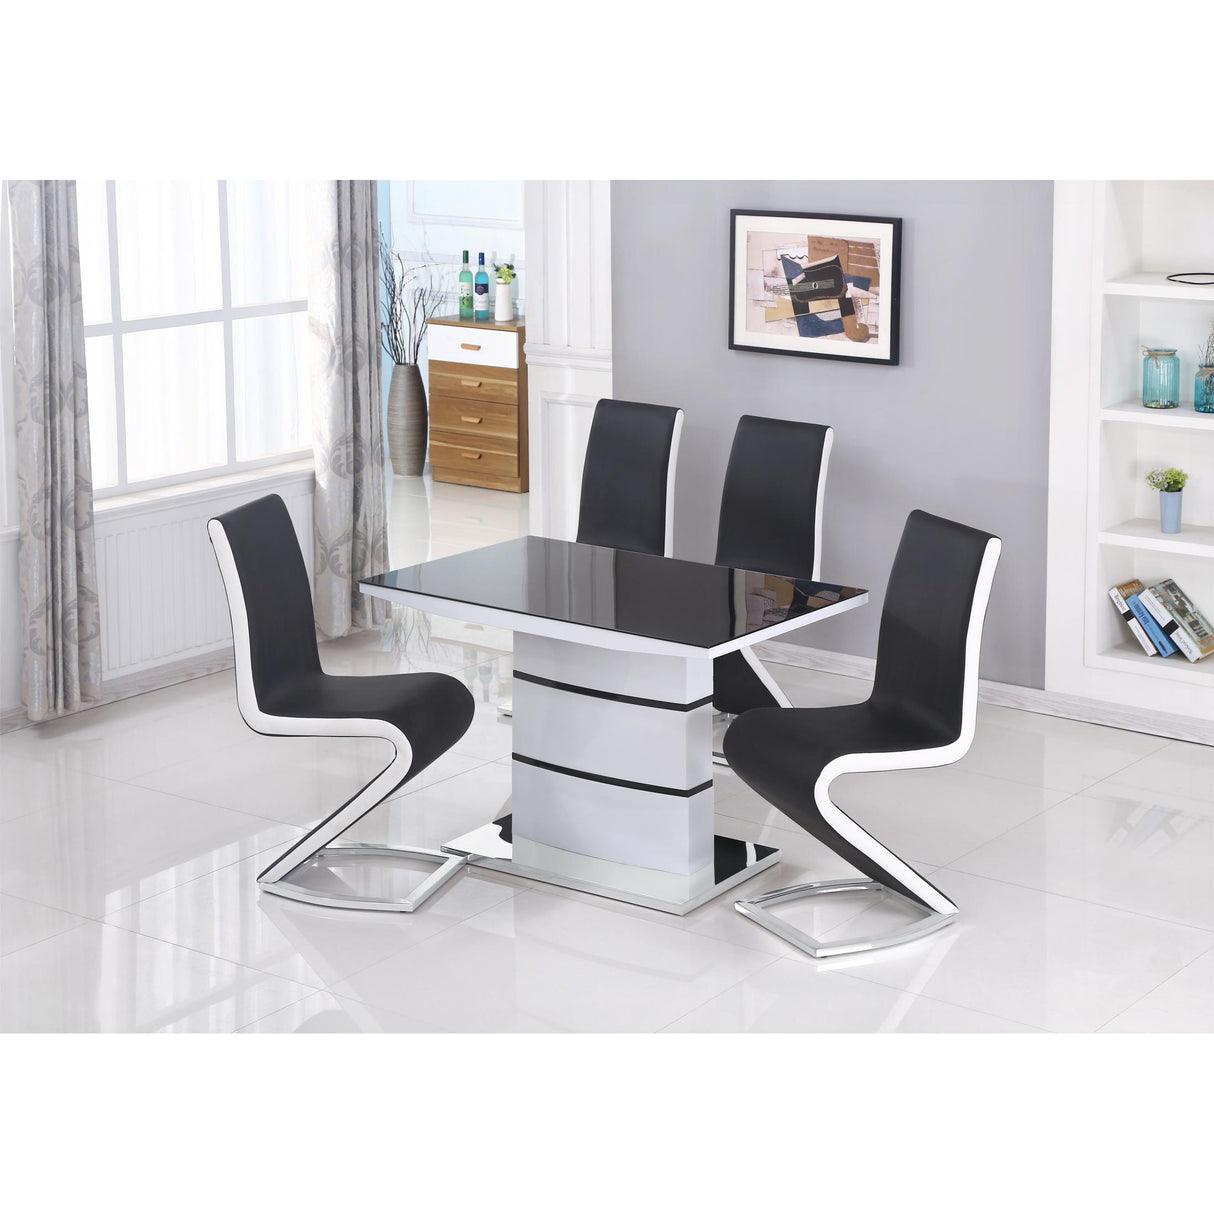 Aldridge Small High Gloss Dining Table White With Grey Glass Top